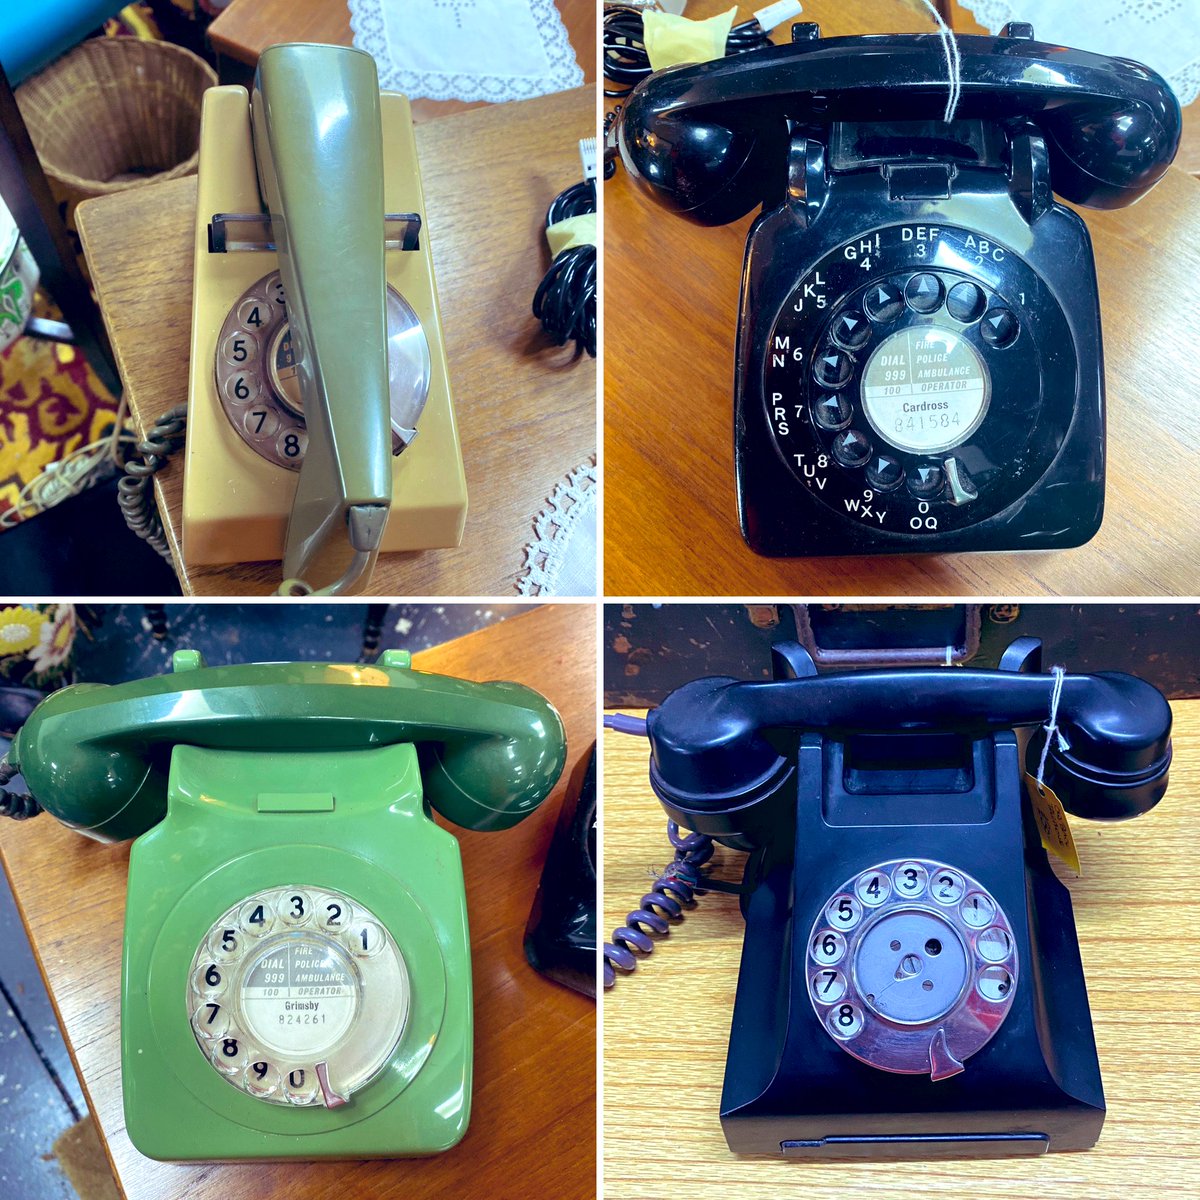 When we had to put a digit in and dial 📞 #nobuttons #retrophone #telephonesoldstyle #dial #vintagetelephones #retrohome #ringring #bt #astraantiquescentre #hemswell #lincolnshire